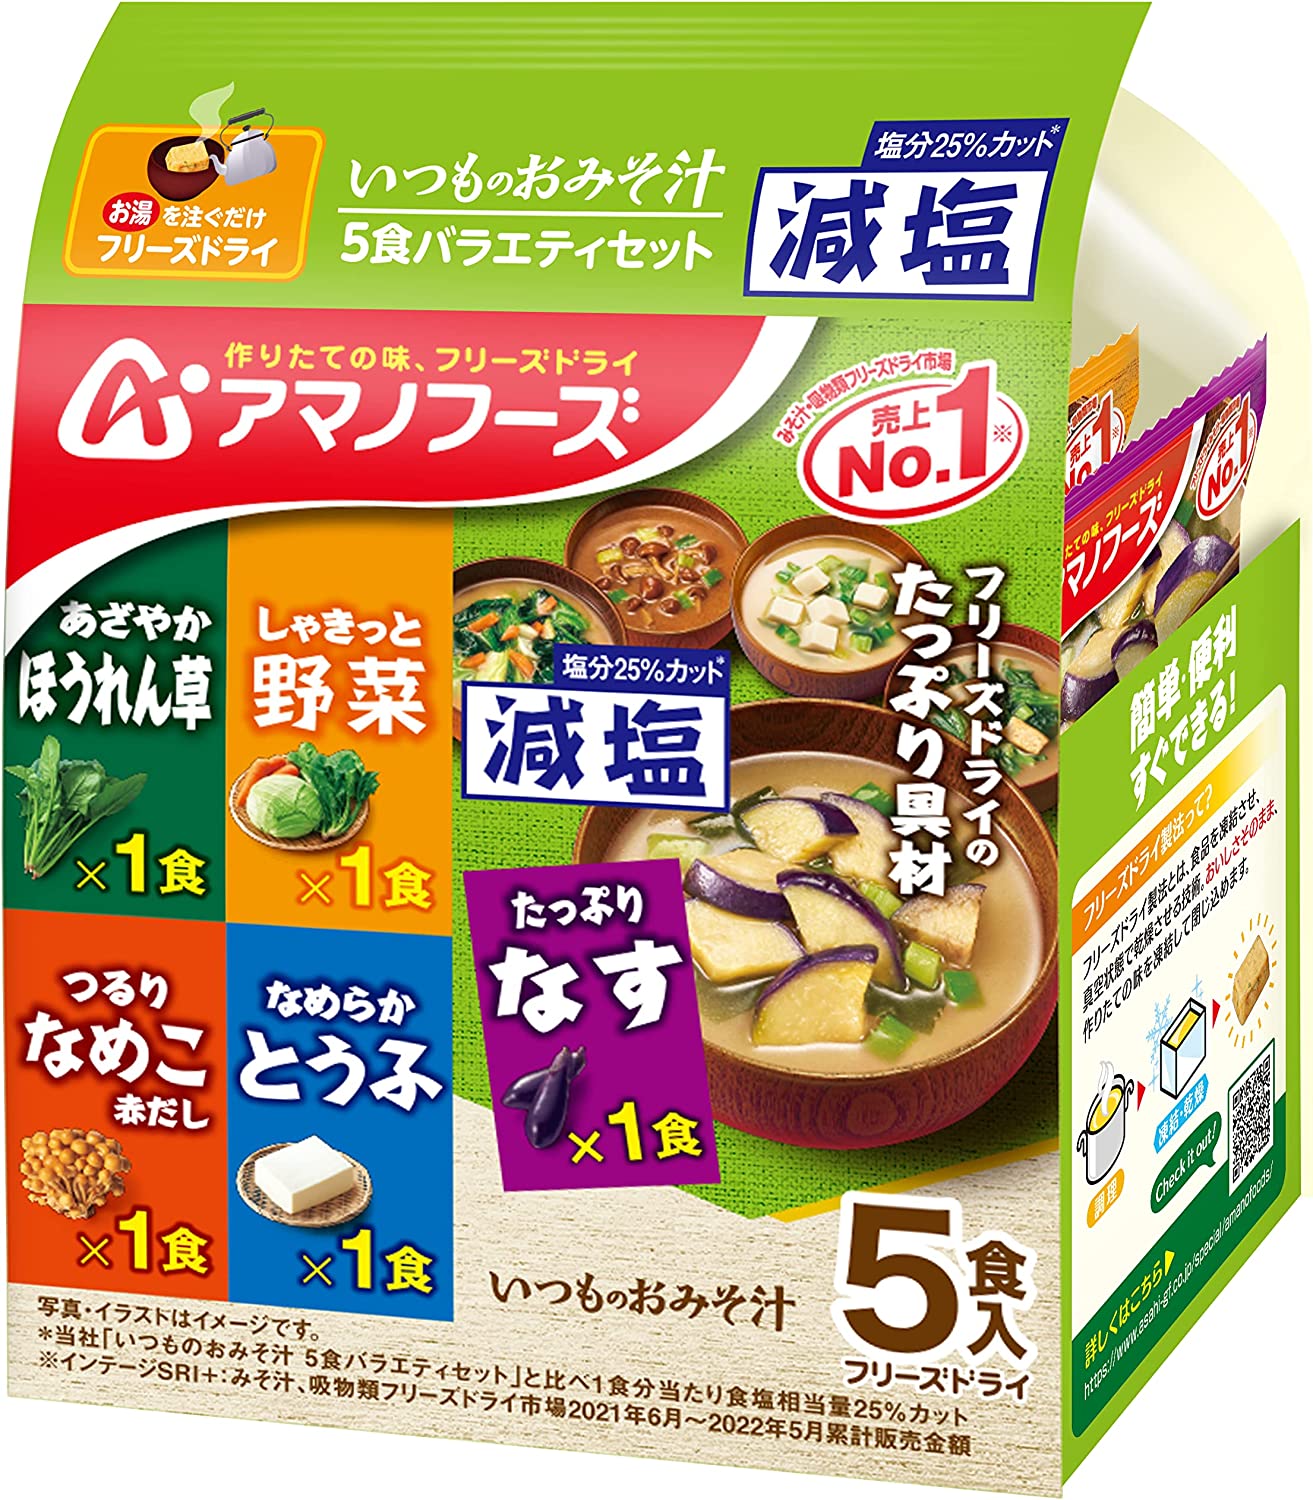 68%OFF!】 ｍａｔｓｕｋｉｙｏＬＡＢ 糖質３．８ｇフィッシュ チキンスティック レッドペッパー味 ８０ｇ 